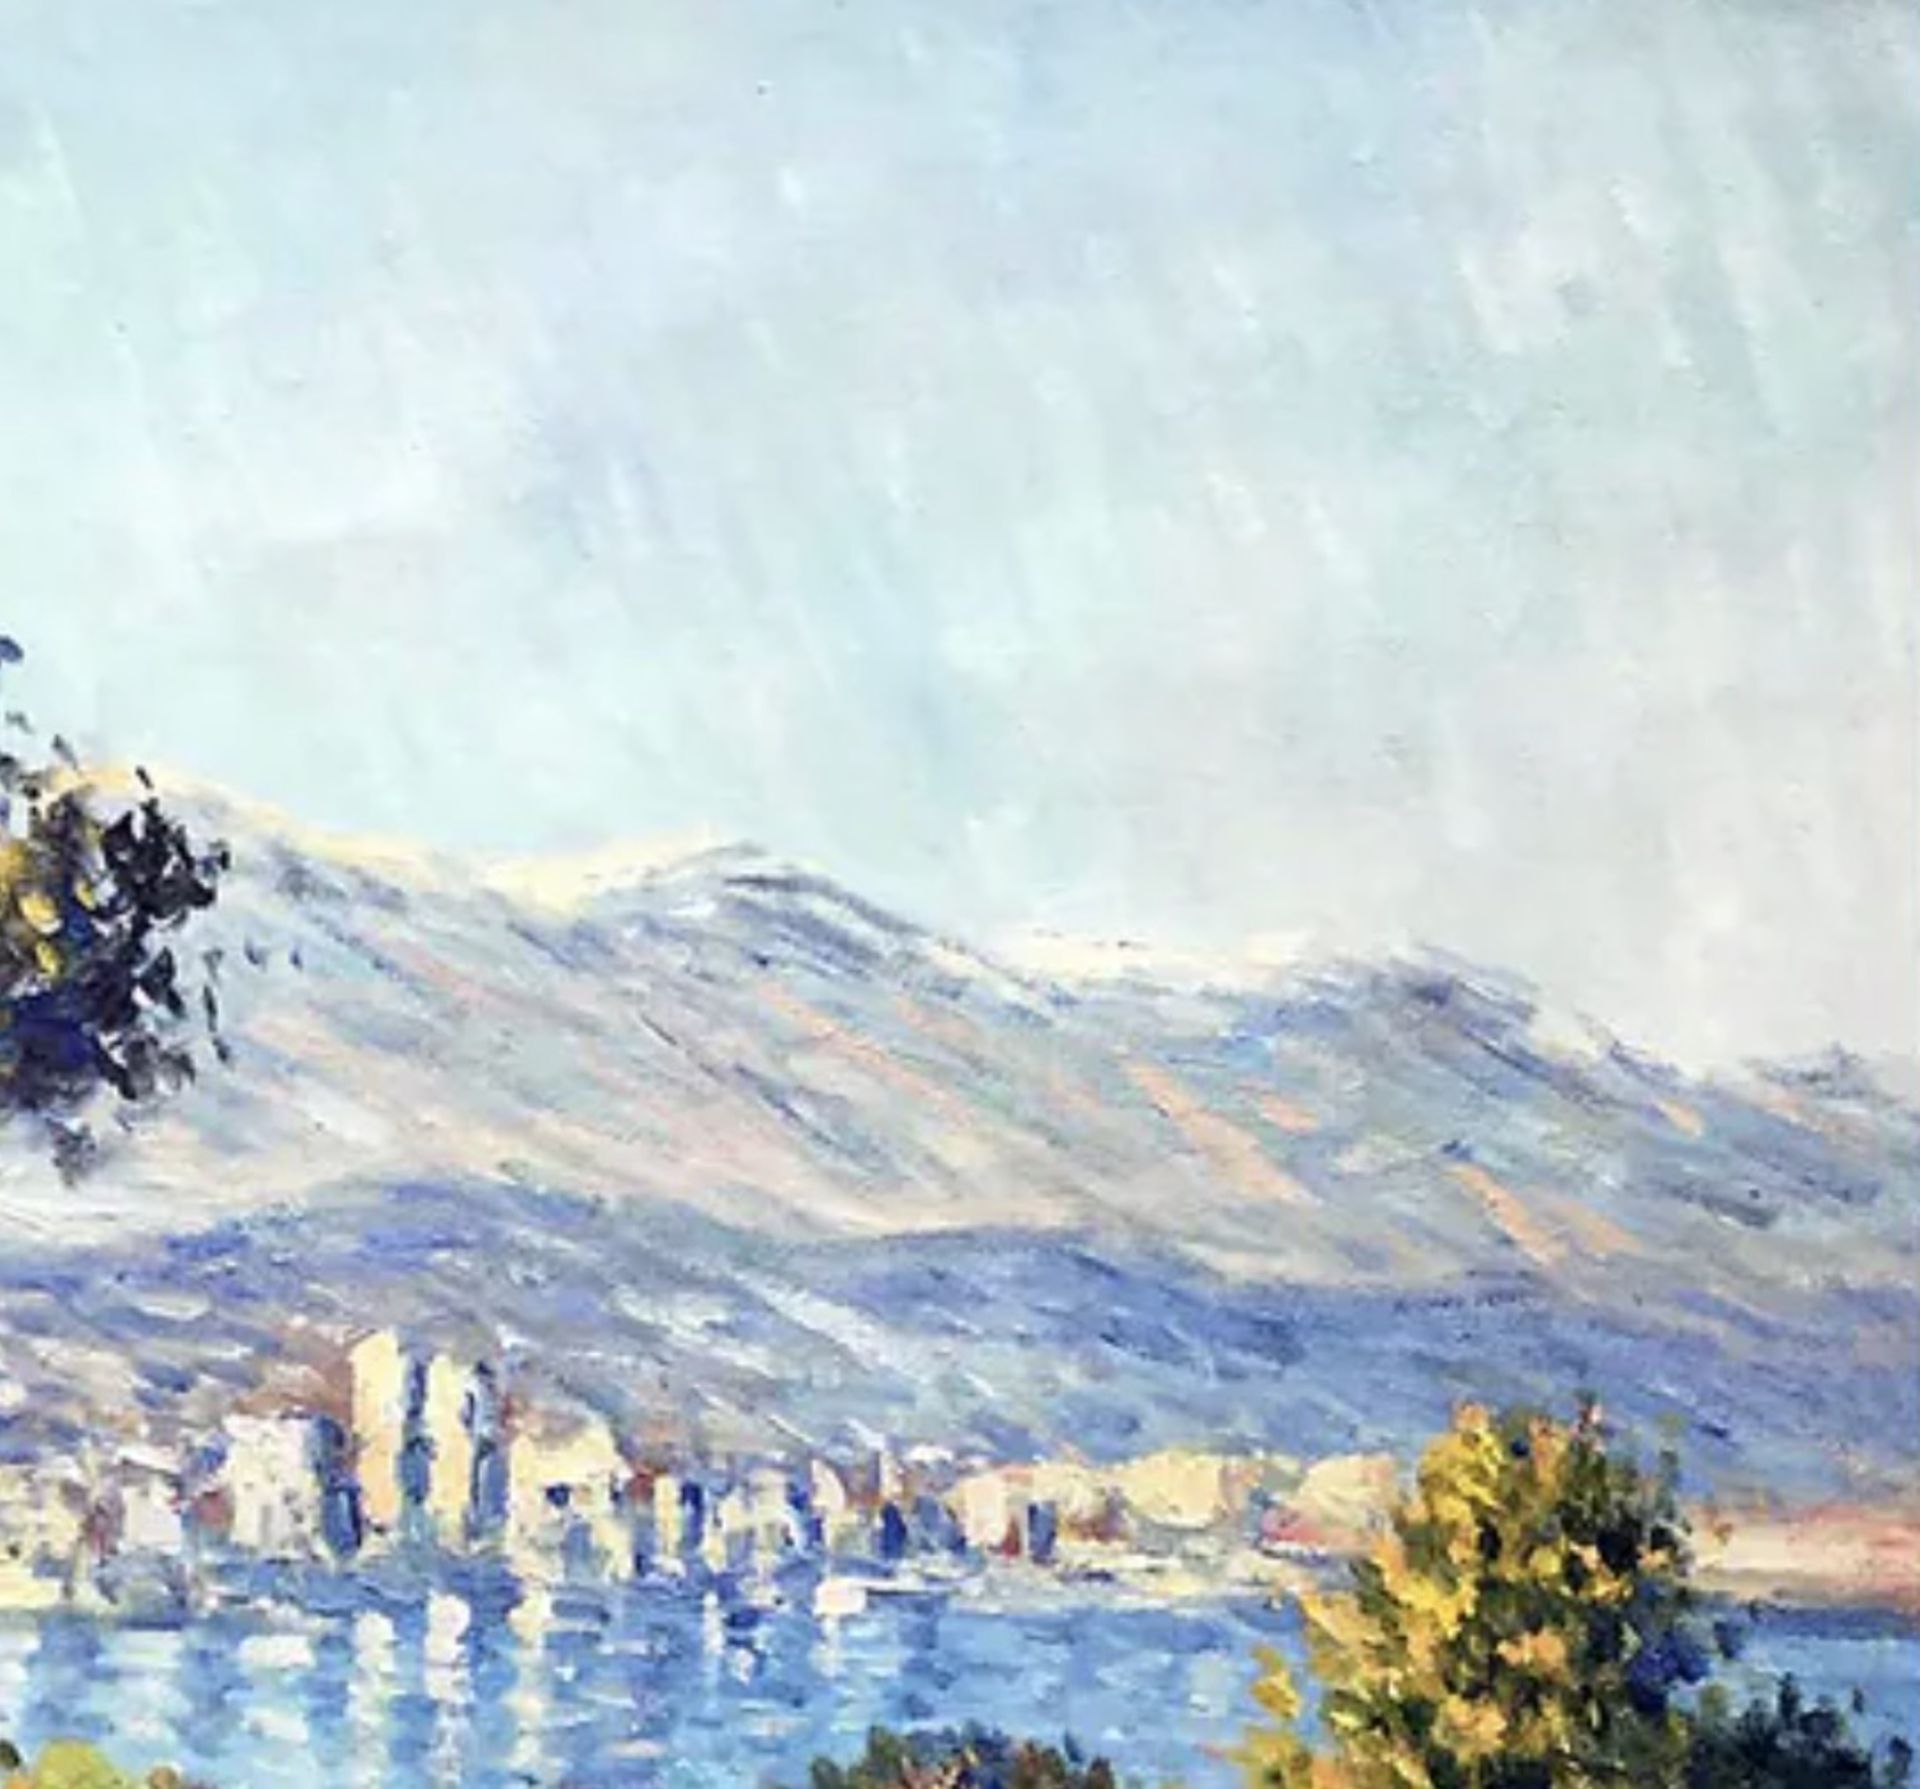 Claude Monet "Antibes, 1888" Oil Painting, After - Image 4 of 6